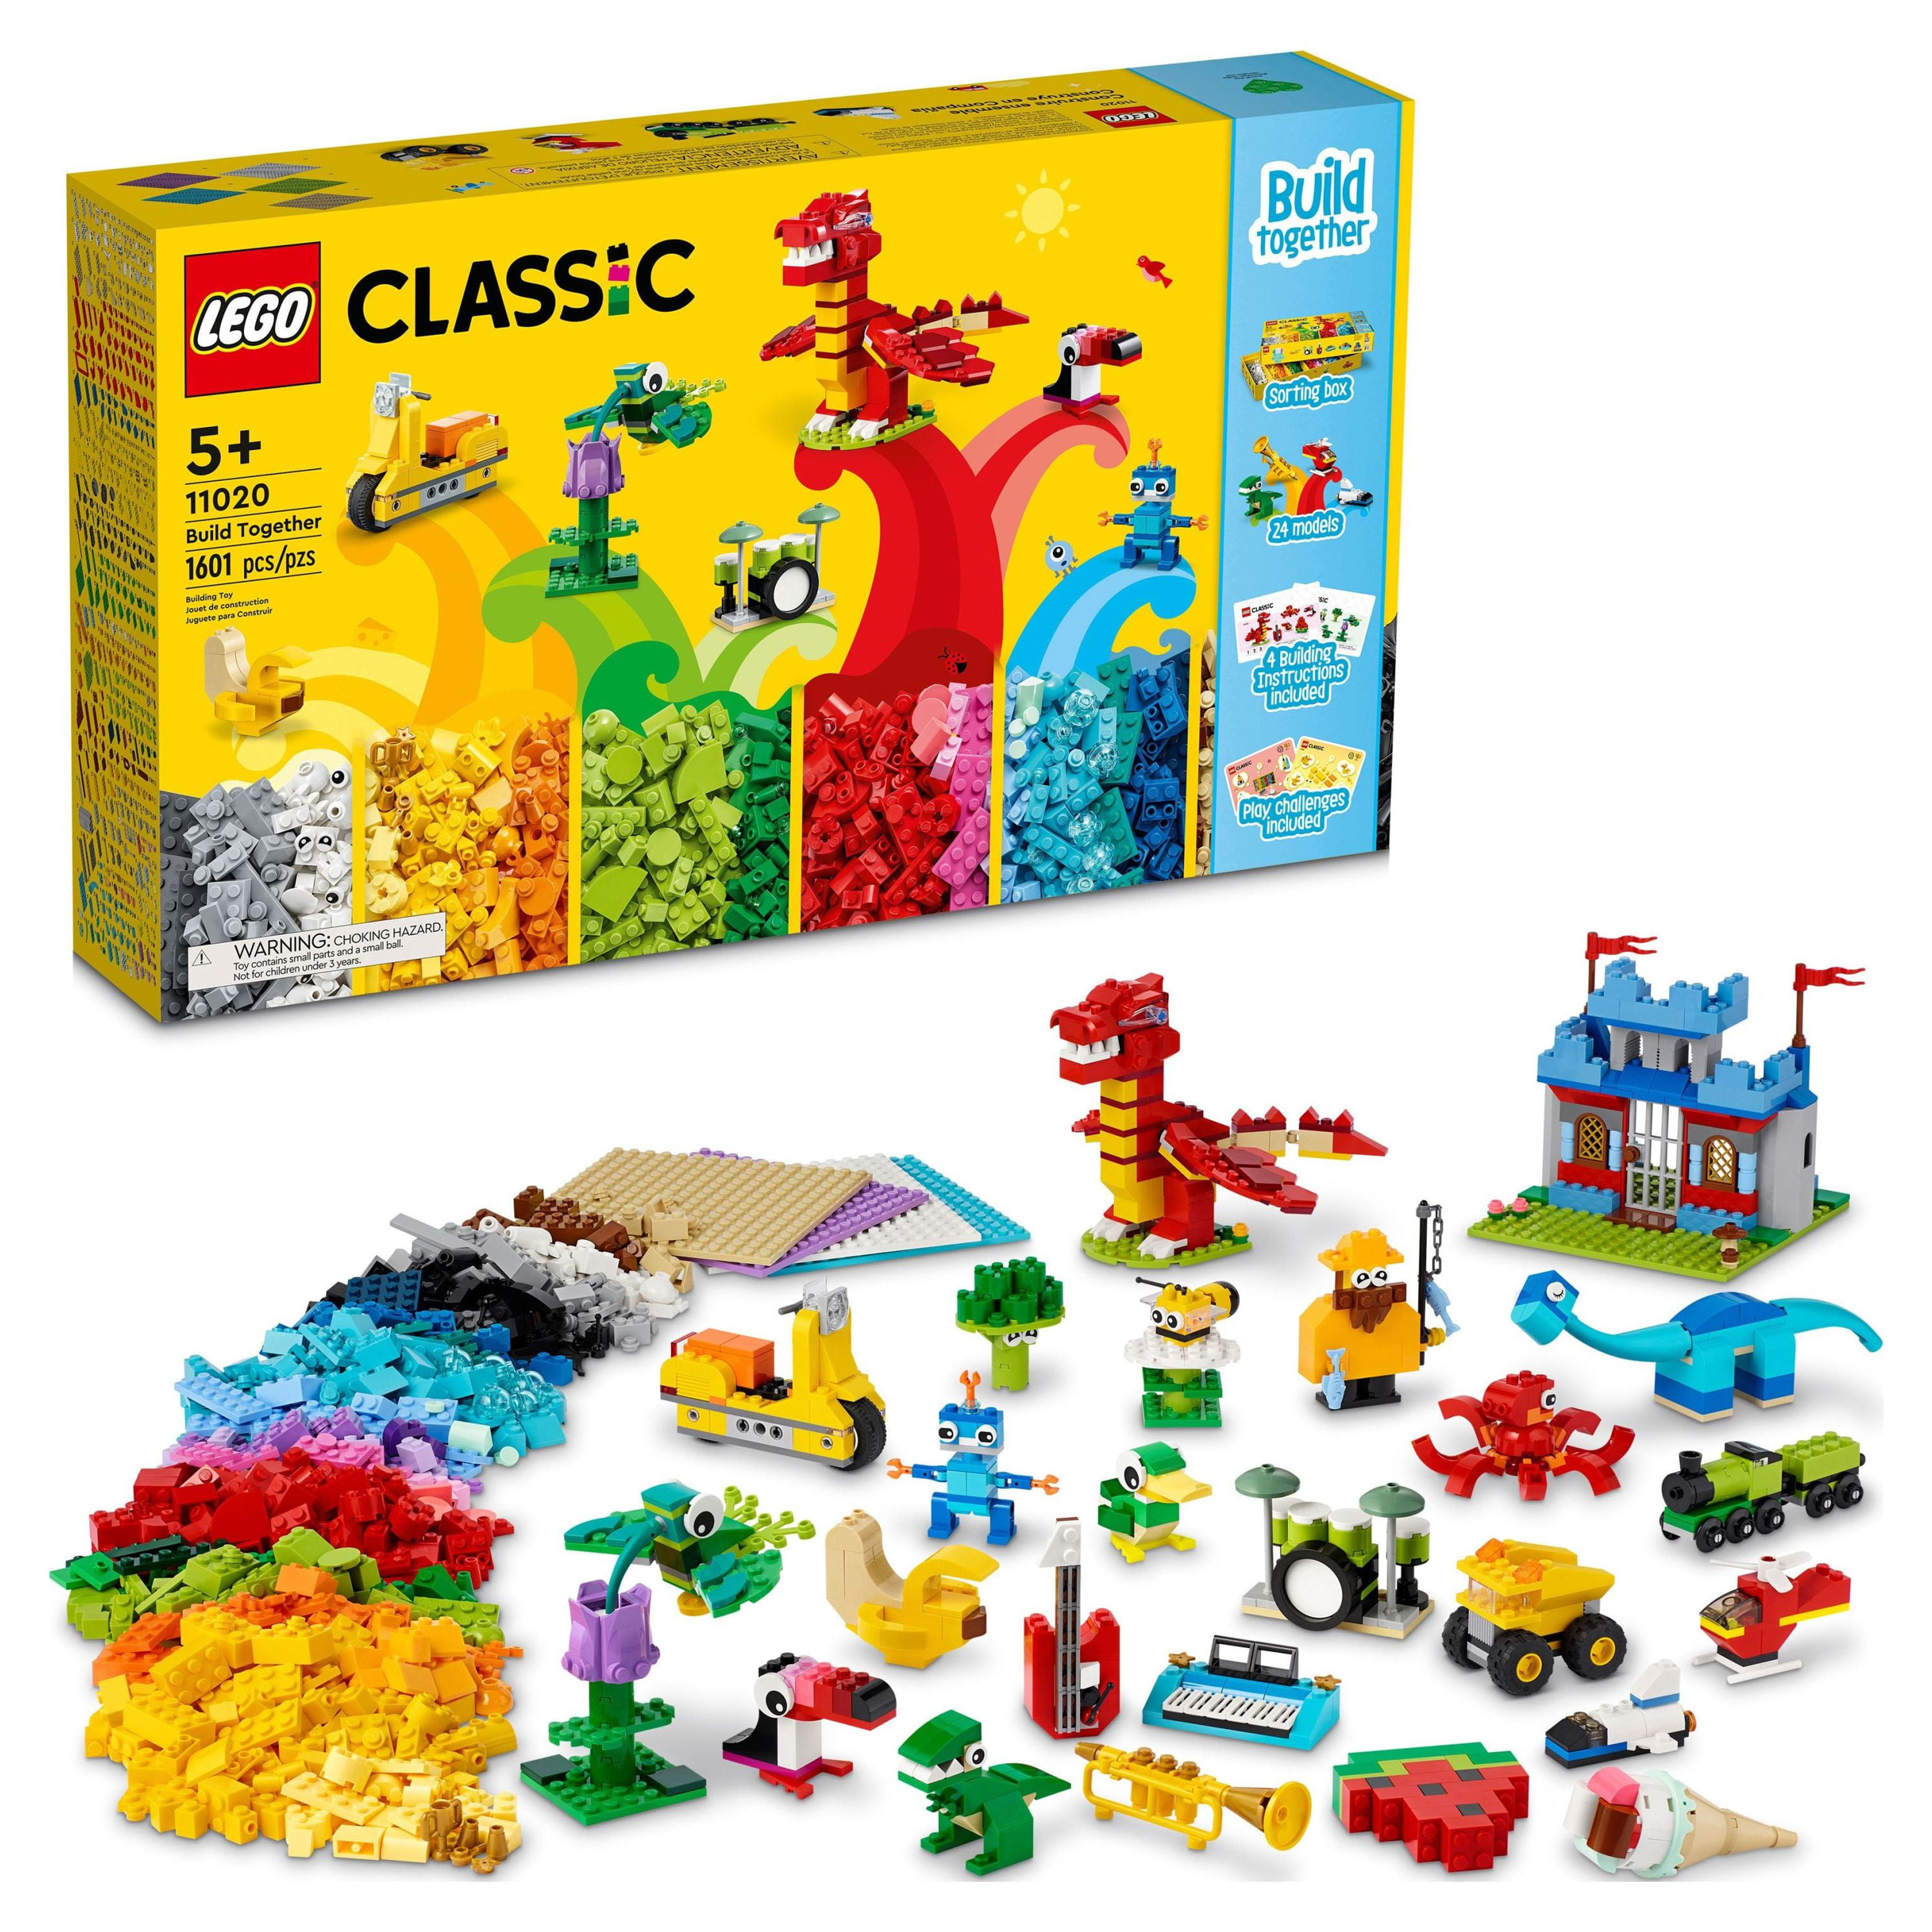 LEGO Classic Build Together 11020 - Creative Building Toy Set, Featuring a  Truck, Train, Helicopter, Dinosaurs, Piano, Drums, Guitar, Great Gift for  Kids to Play and Be Inspired by LEGO Masters 